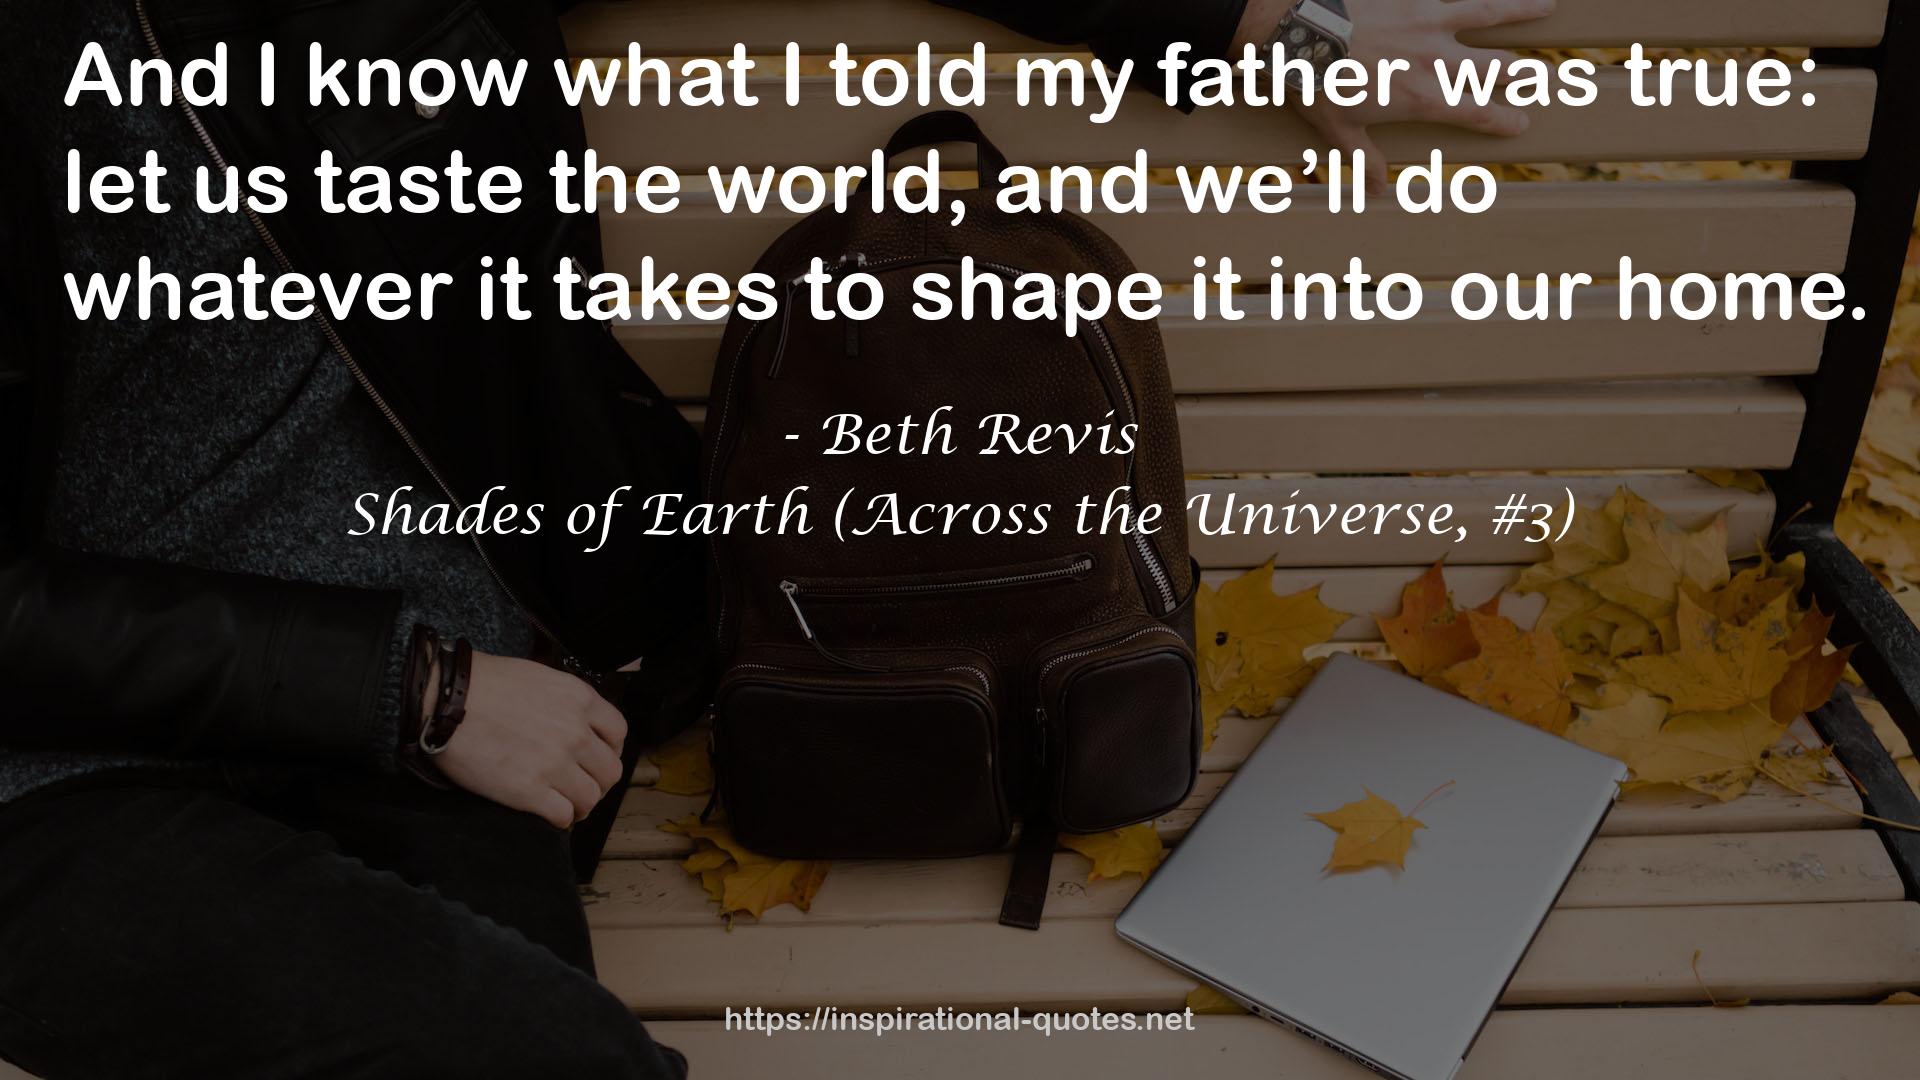 Shades of Earth (Across the Universe, #3) QUOTES